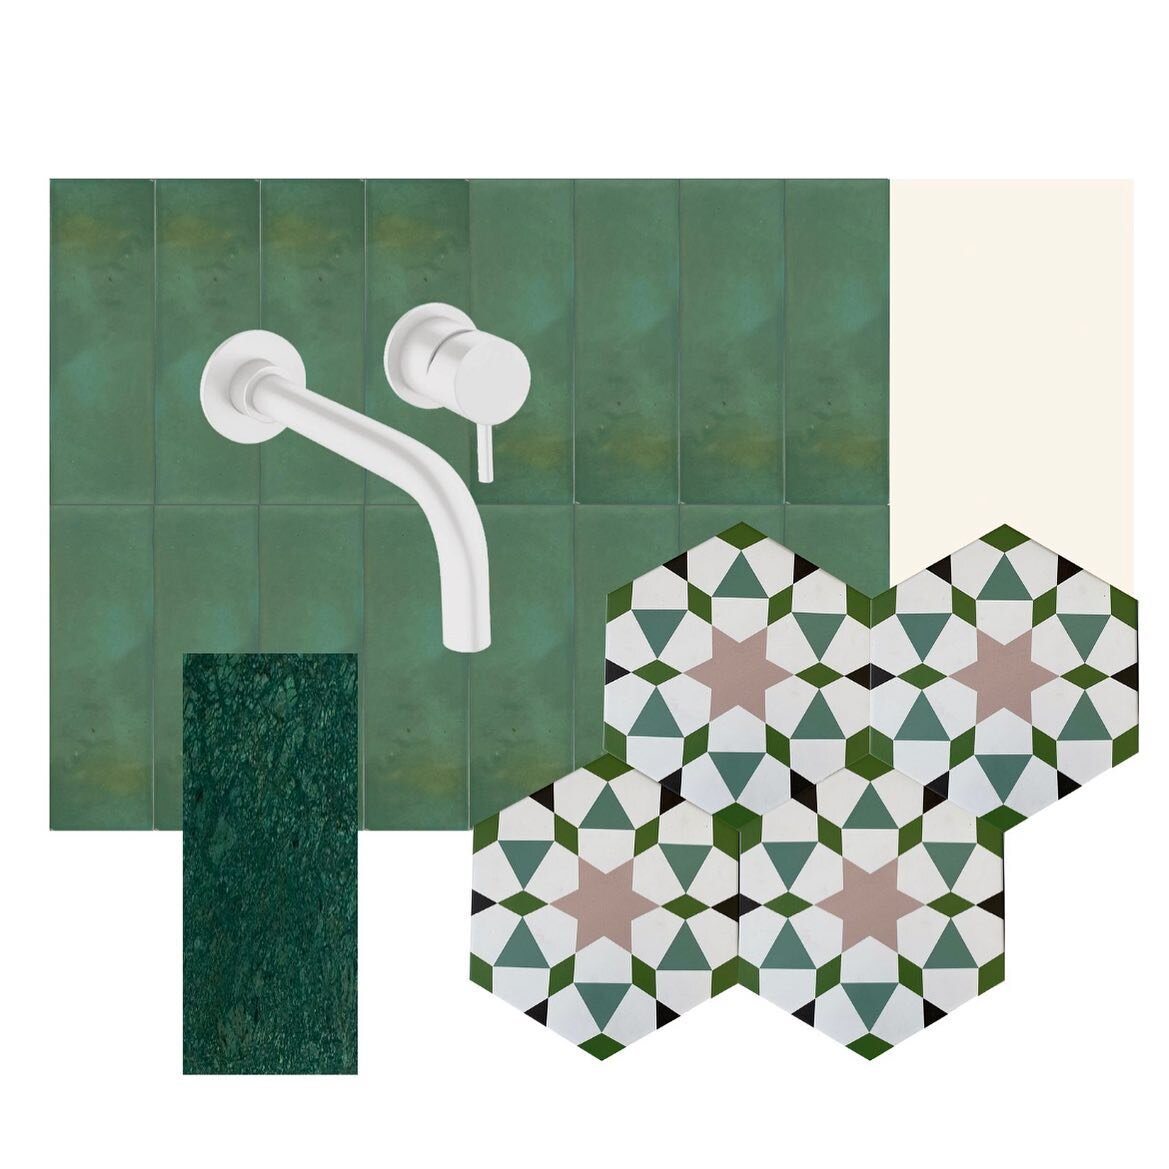 💚 FAMILY BATHROOM💚
I&rsquo;ve put together a materials board for the family bathroom. This will mainly be for the kids but guests will also use it! 
The patterned tile from @mariastarling is porcelain but based on her beautiful encaustic range, the